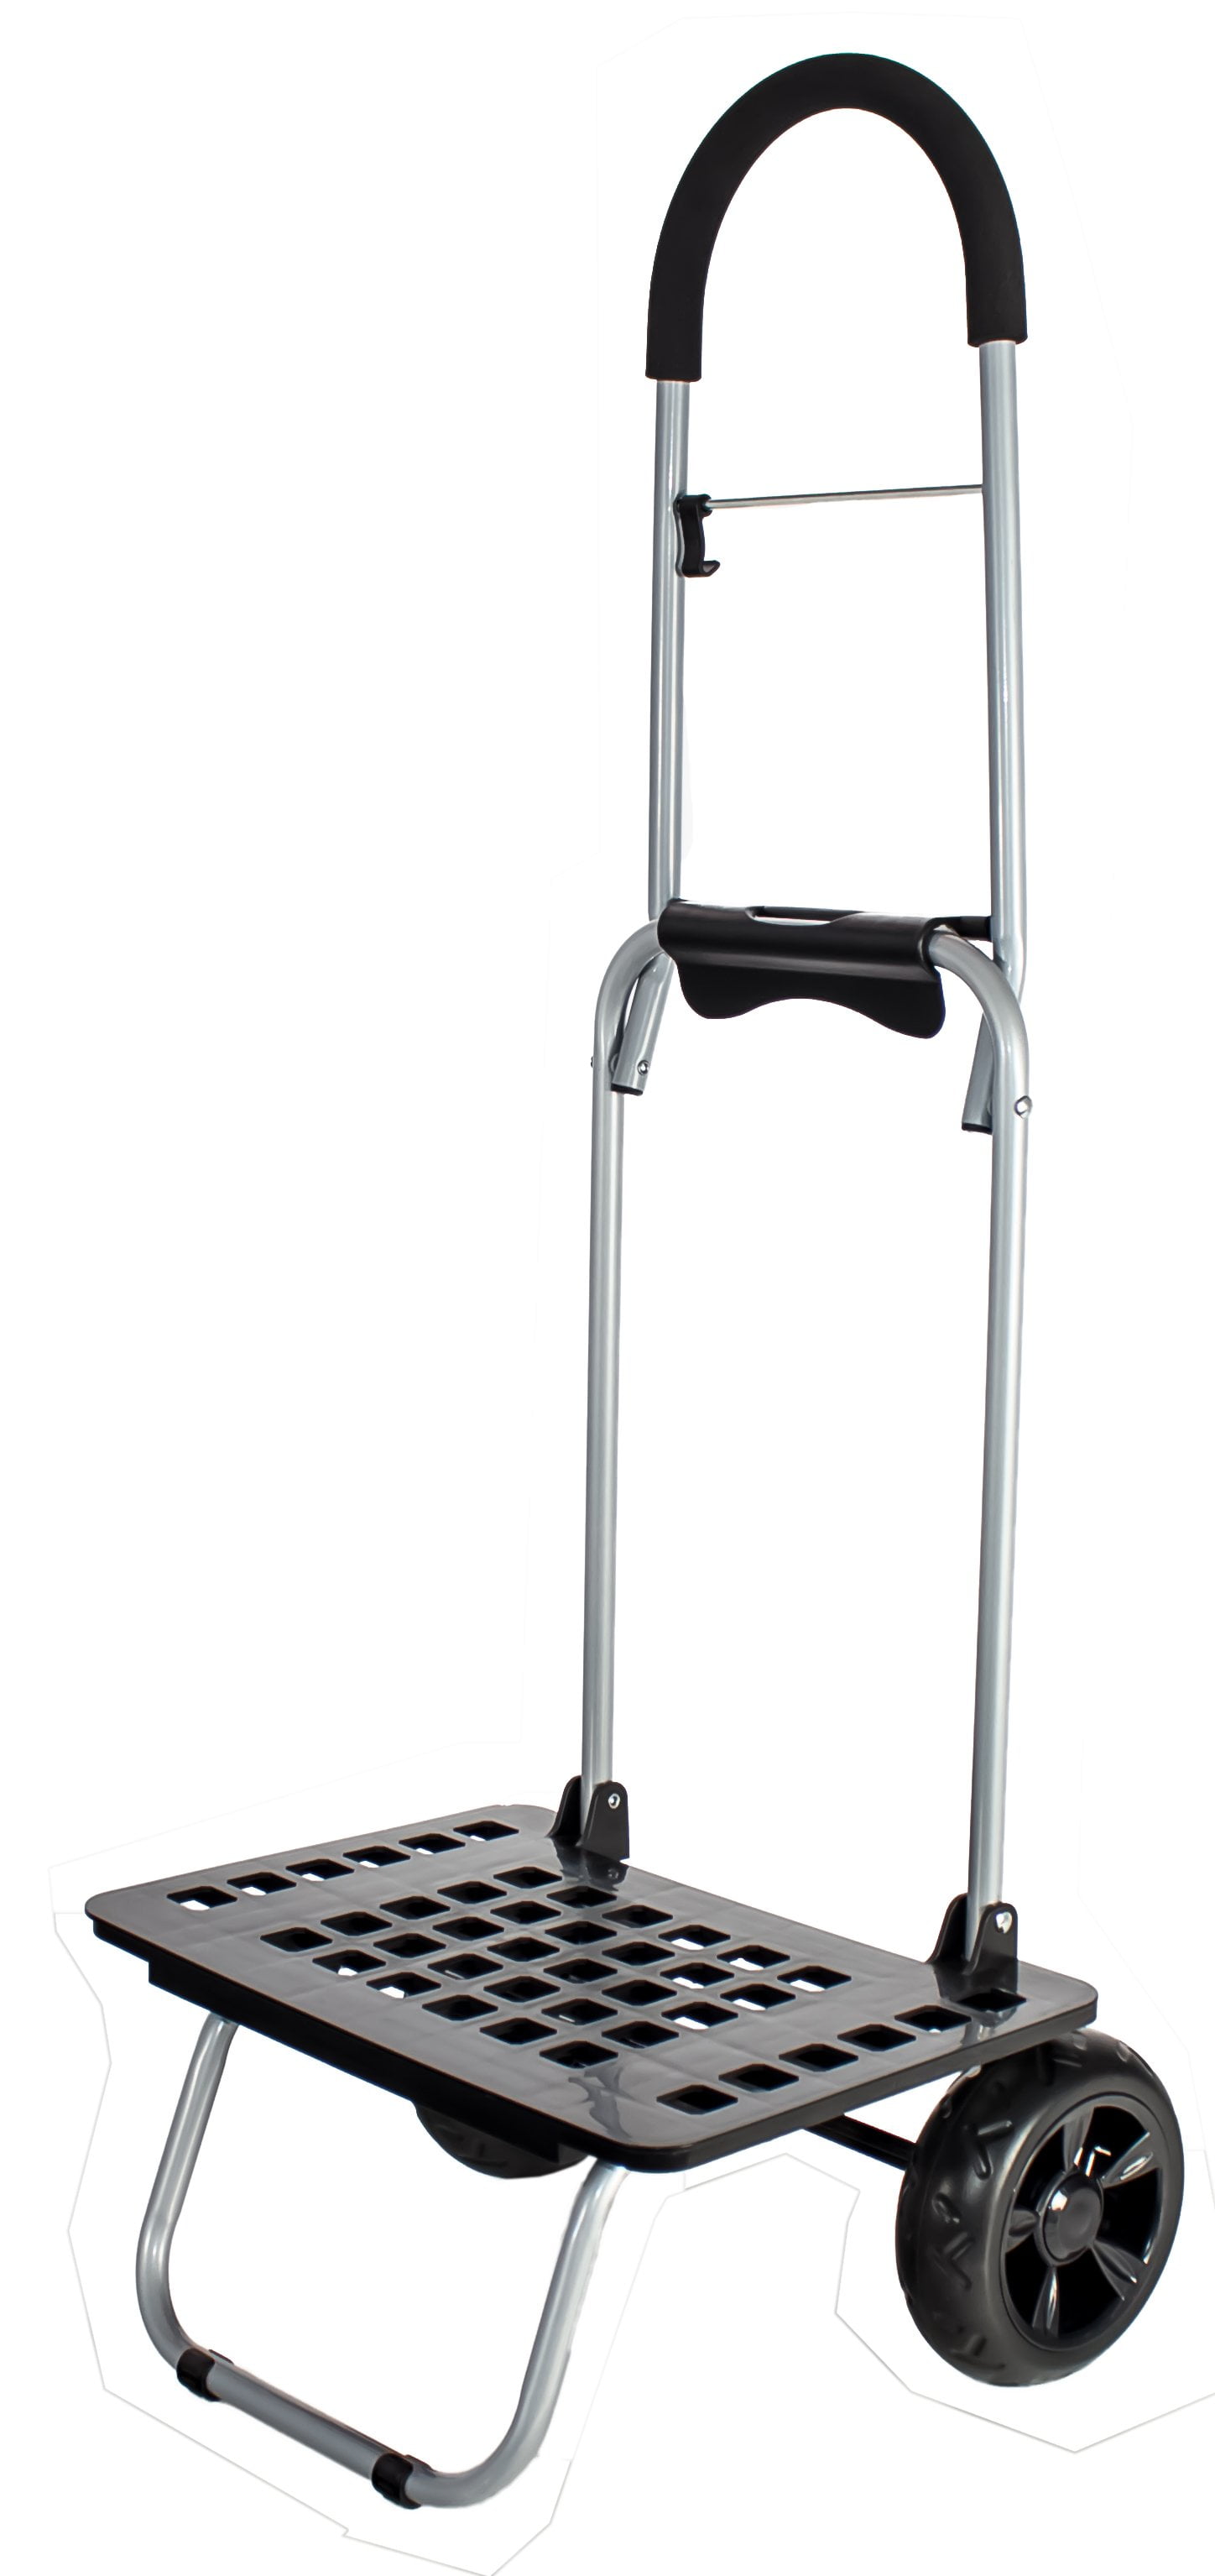 Stair Climber Mighty Max Personal Dolly Brown Hand Truck Hardware Garden Utility Cart 